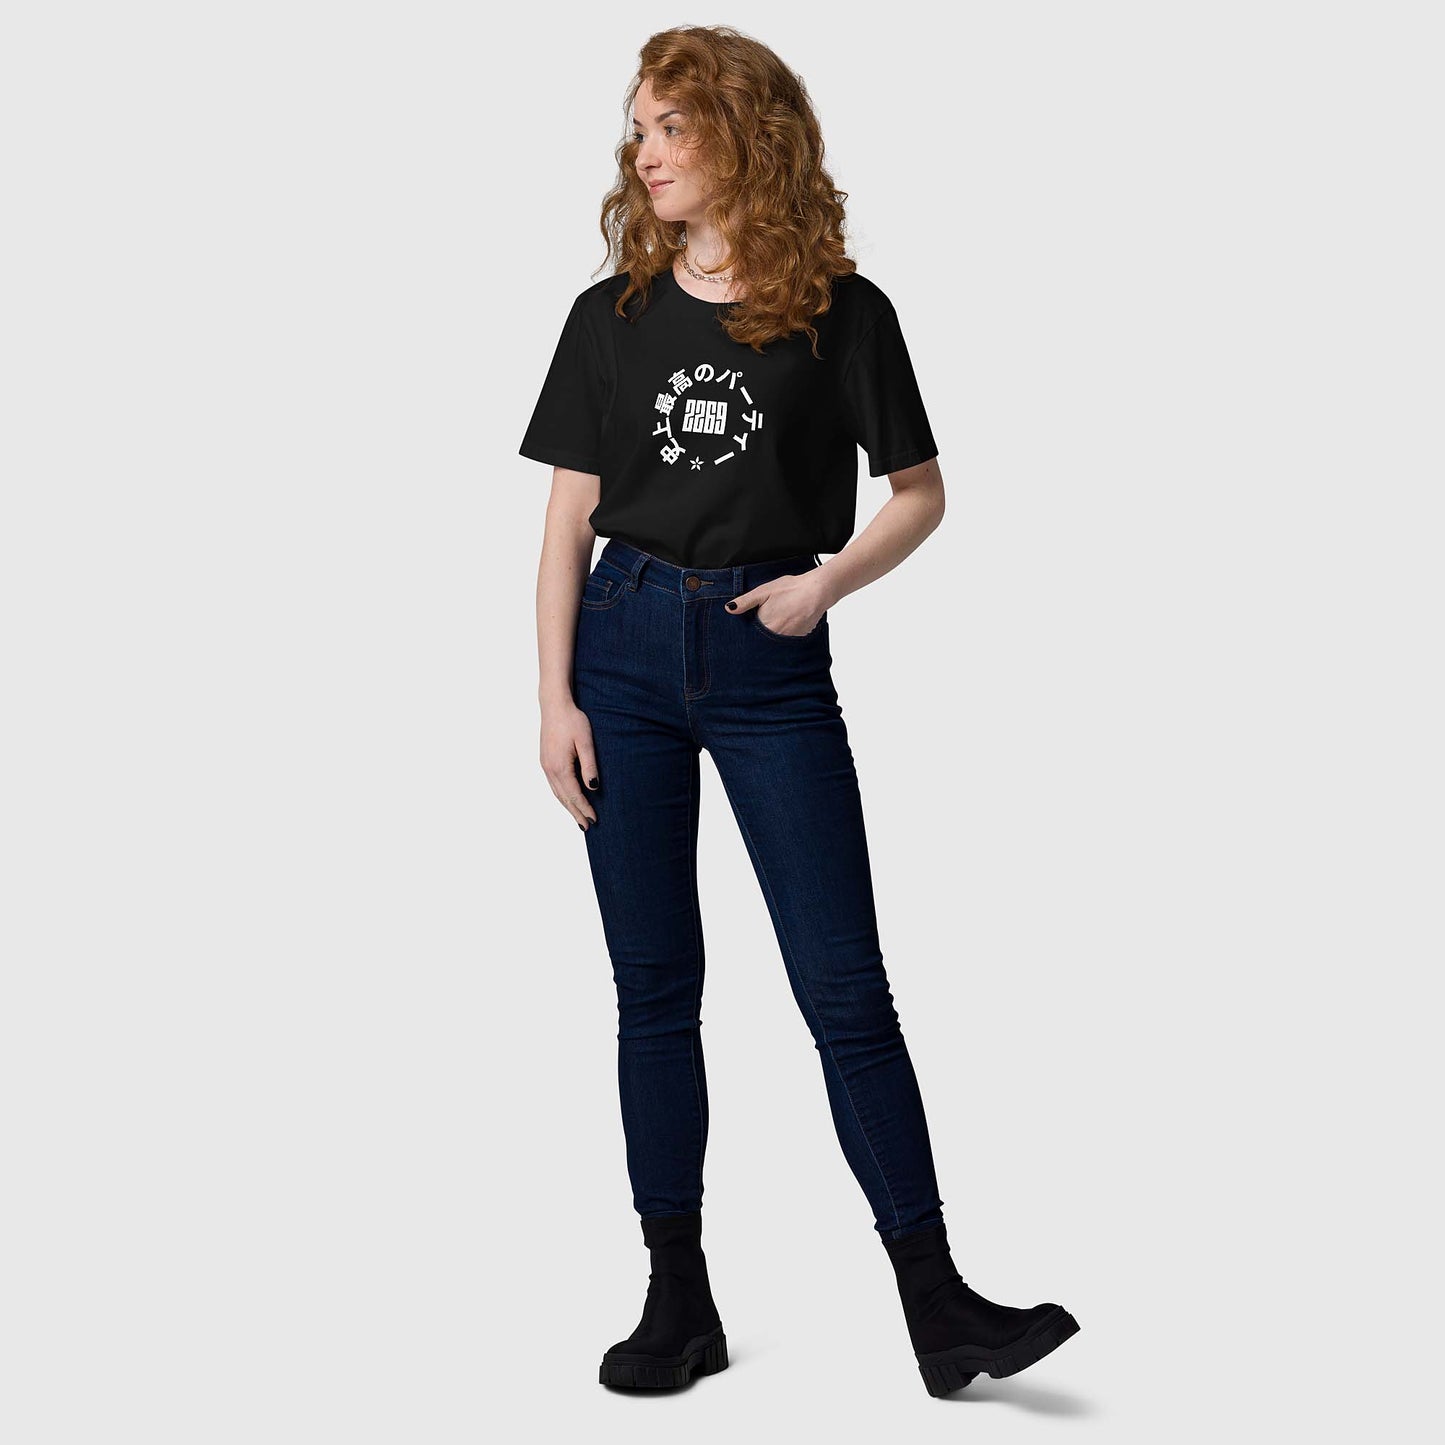 Unisex black organic cotton t-shirt with Japanese 2269 party circle